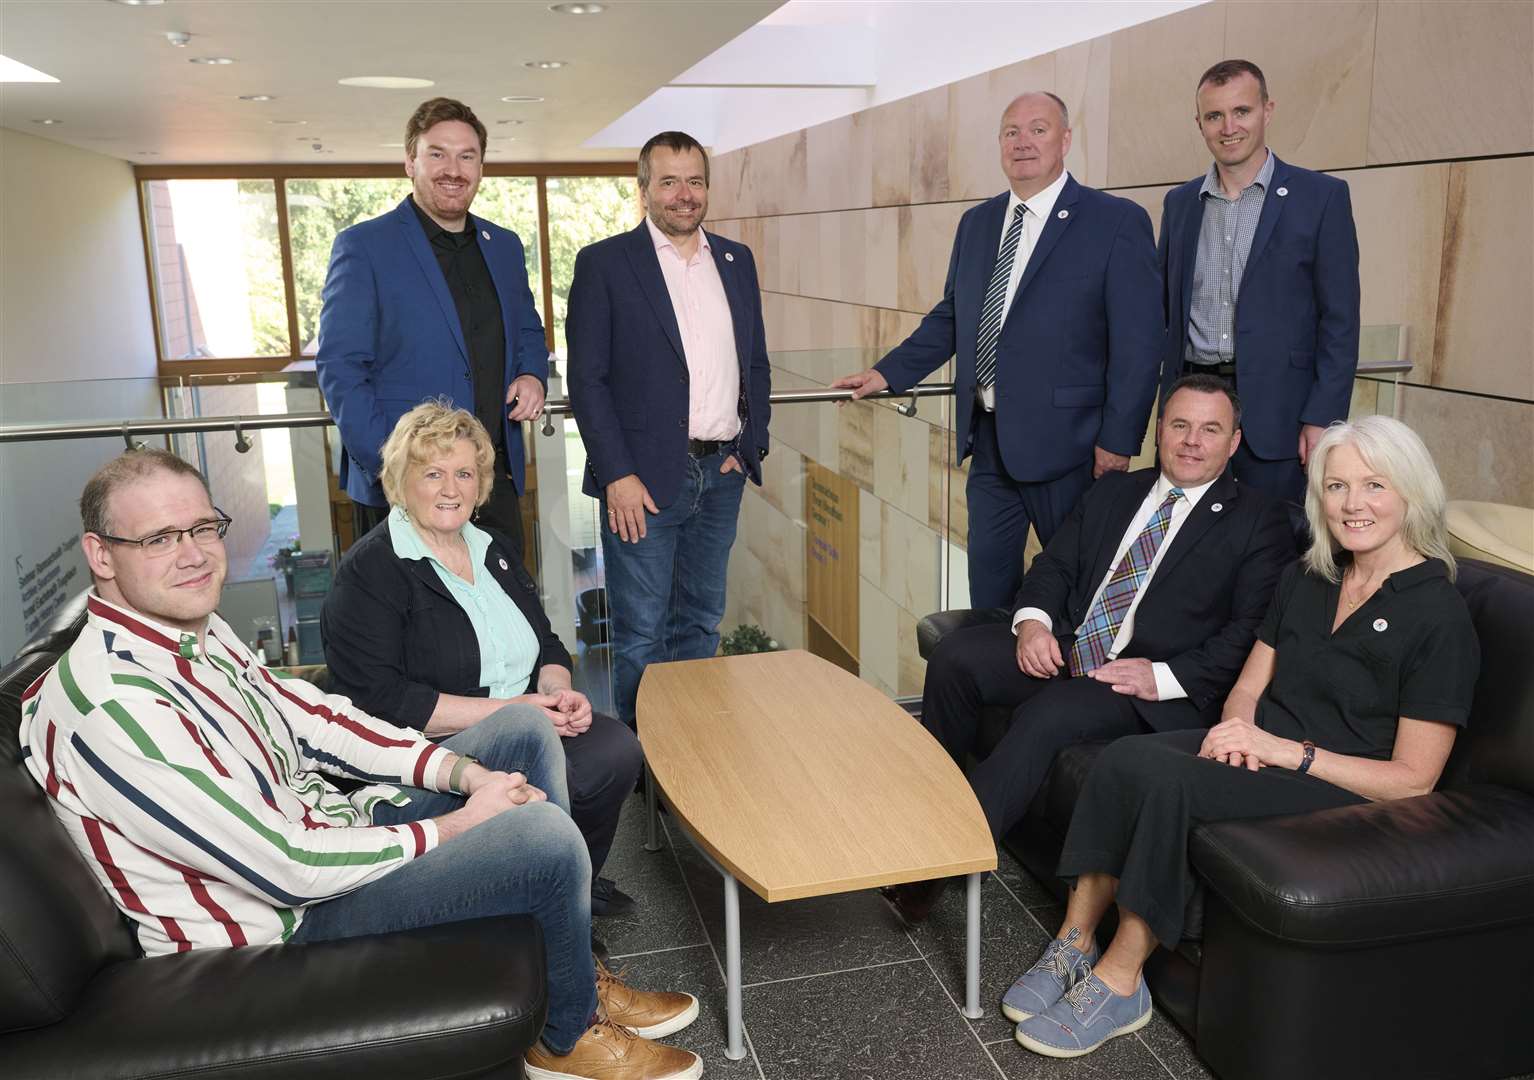 New members of High Life Highland (HLH) Board and Trading Board, from left, Cllr Andrew Jarvie, Cllr Biz Campbell, Michael Golding, Mark Tate, David Beaton, Michael Boylan, Steve Walsh (chief executive of High Life Highland) and Cllr Marianne Hutchison. Picture: HLH/Ewen Weatherspoon Photography